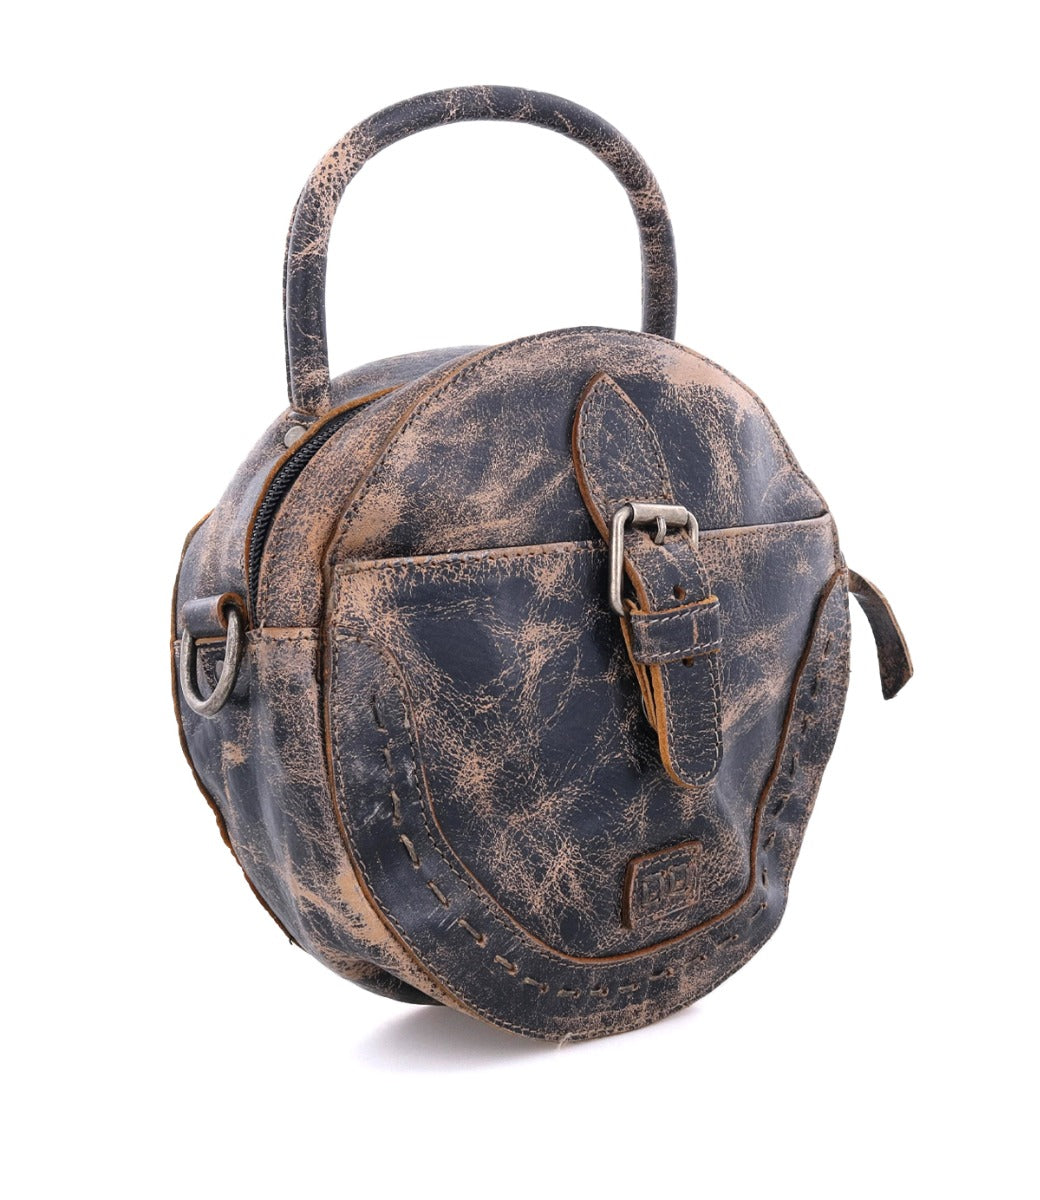 A round brown leather Arenfield bag with a handle by Bed Stu.